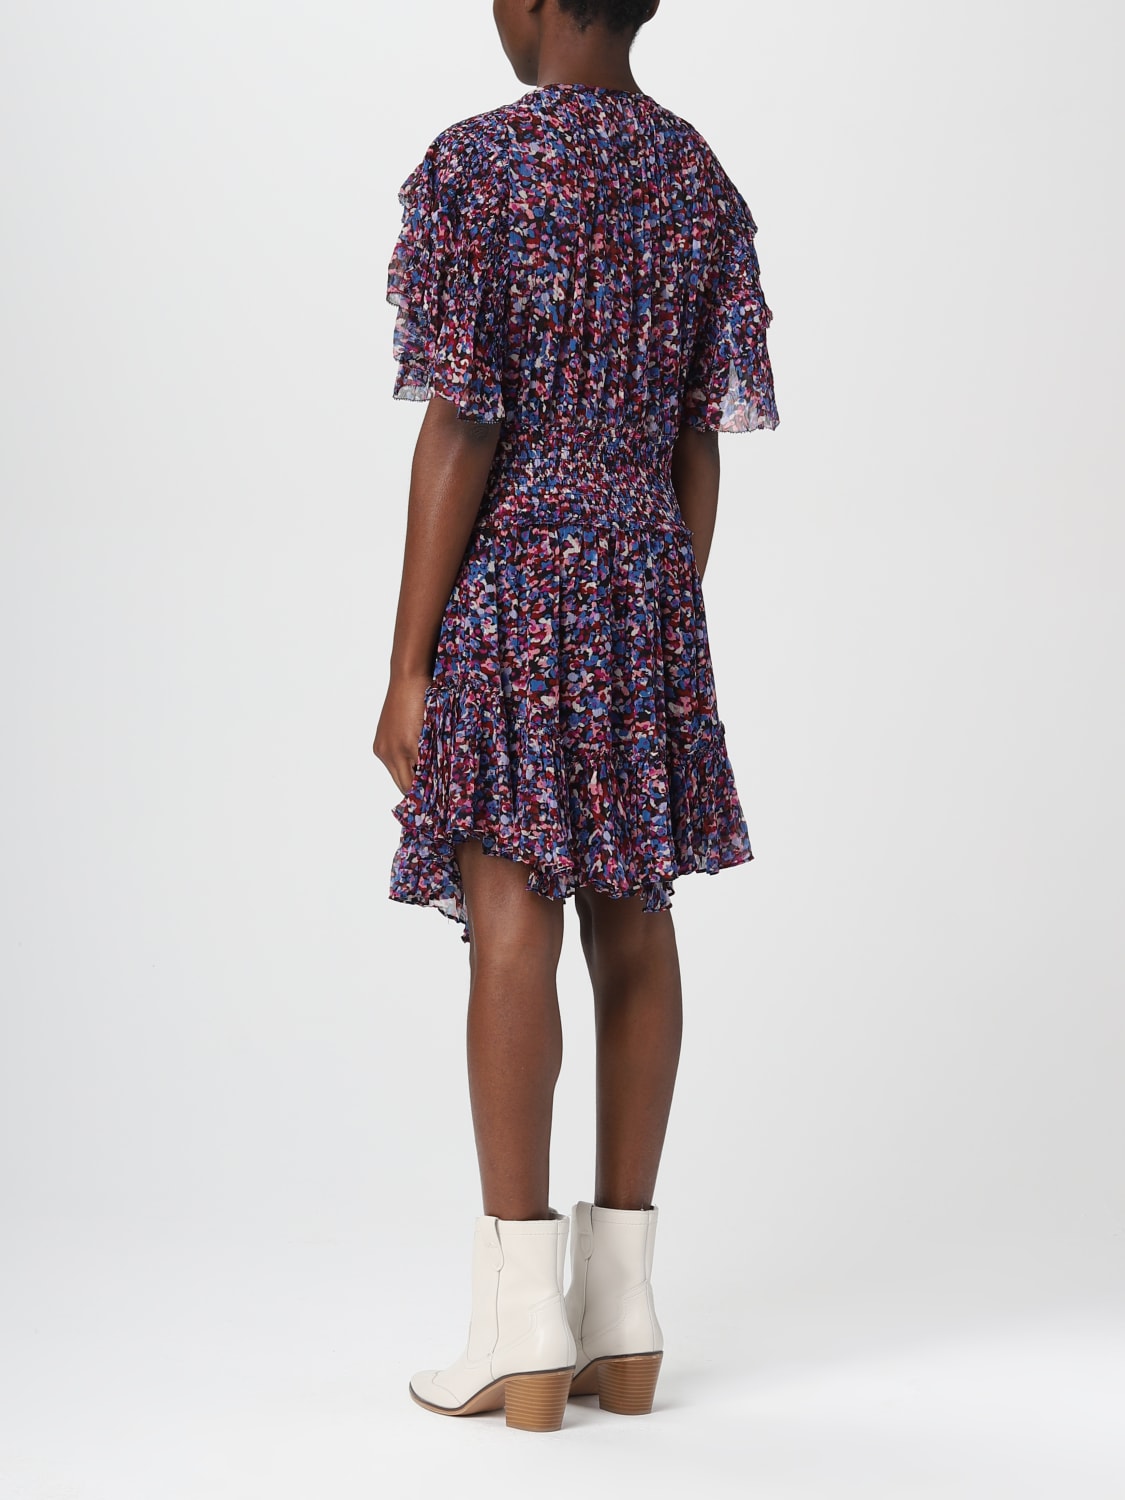 ISABEL MARANT ETOILE: dress for woman Pink | Isabel Marant dress RO0032FAA1J49E online on GIGLIO.COM